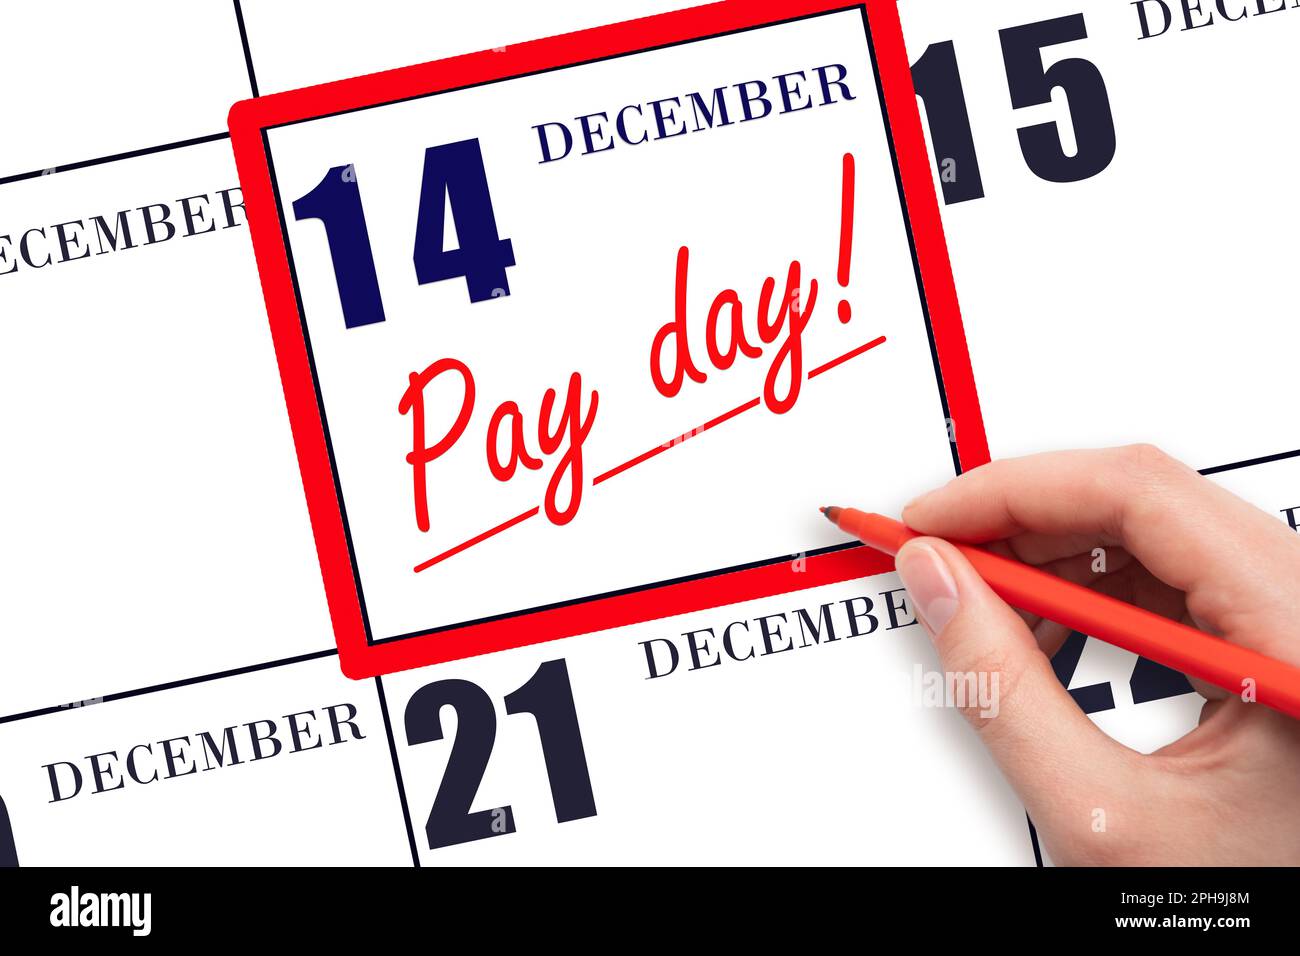 14th day of December. Hand writing text PAY DATE on calendar date December 14 and underline it. Payment due date. Reminder concept of payment. Winter Stock Photo